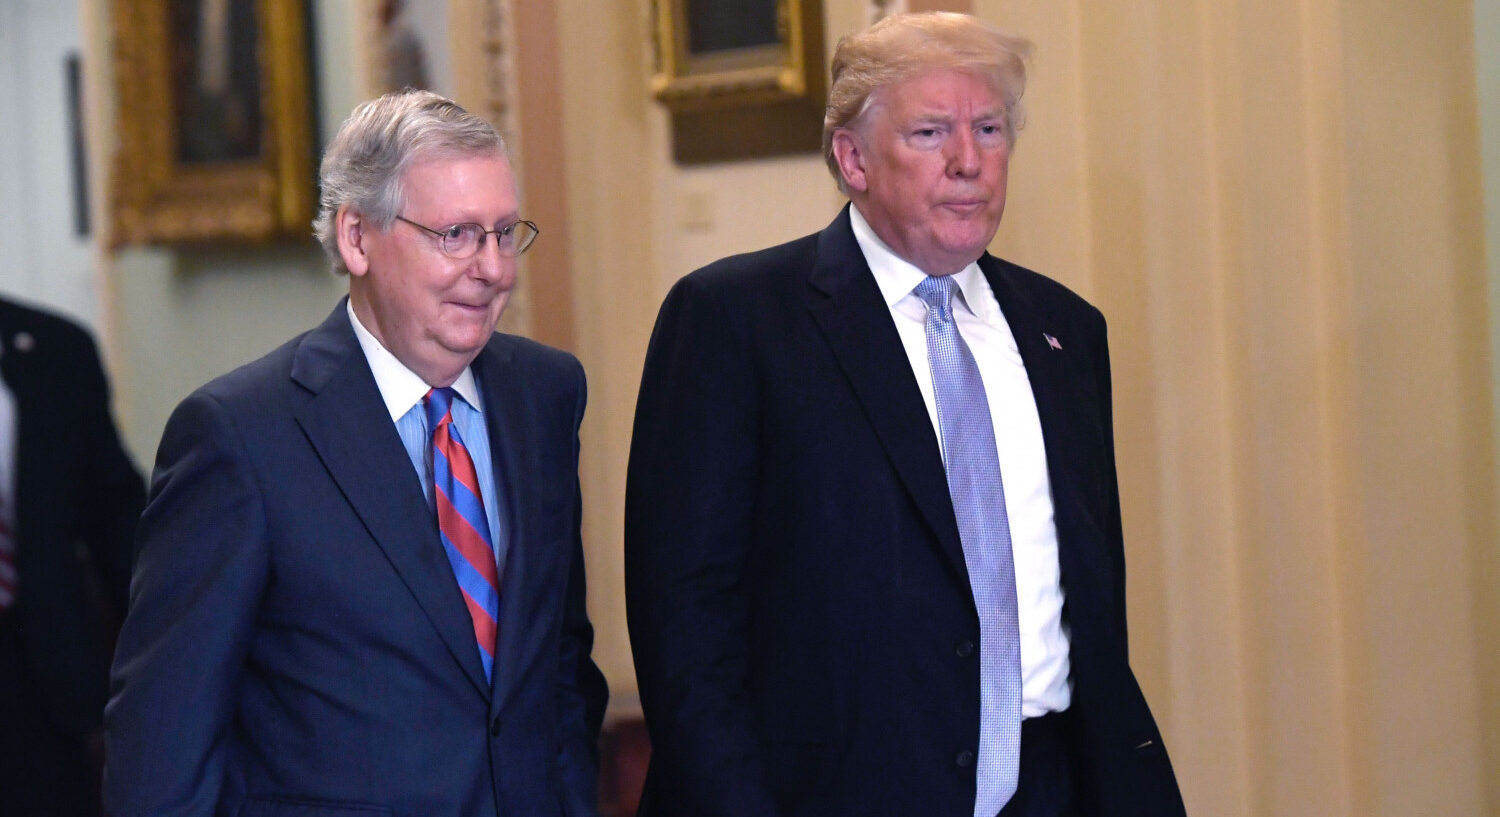 Trump Roasts McConnell for Suggesting He’s ‘Unlikely’ to Be Republican Nominee in 2024